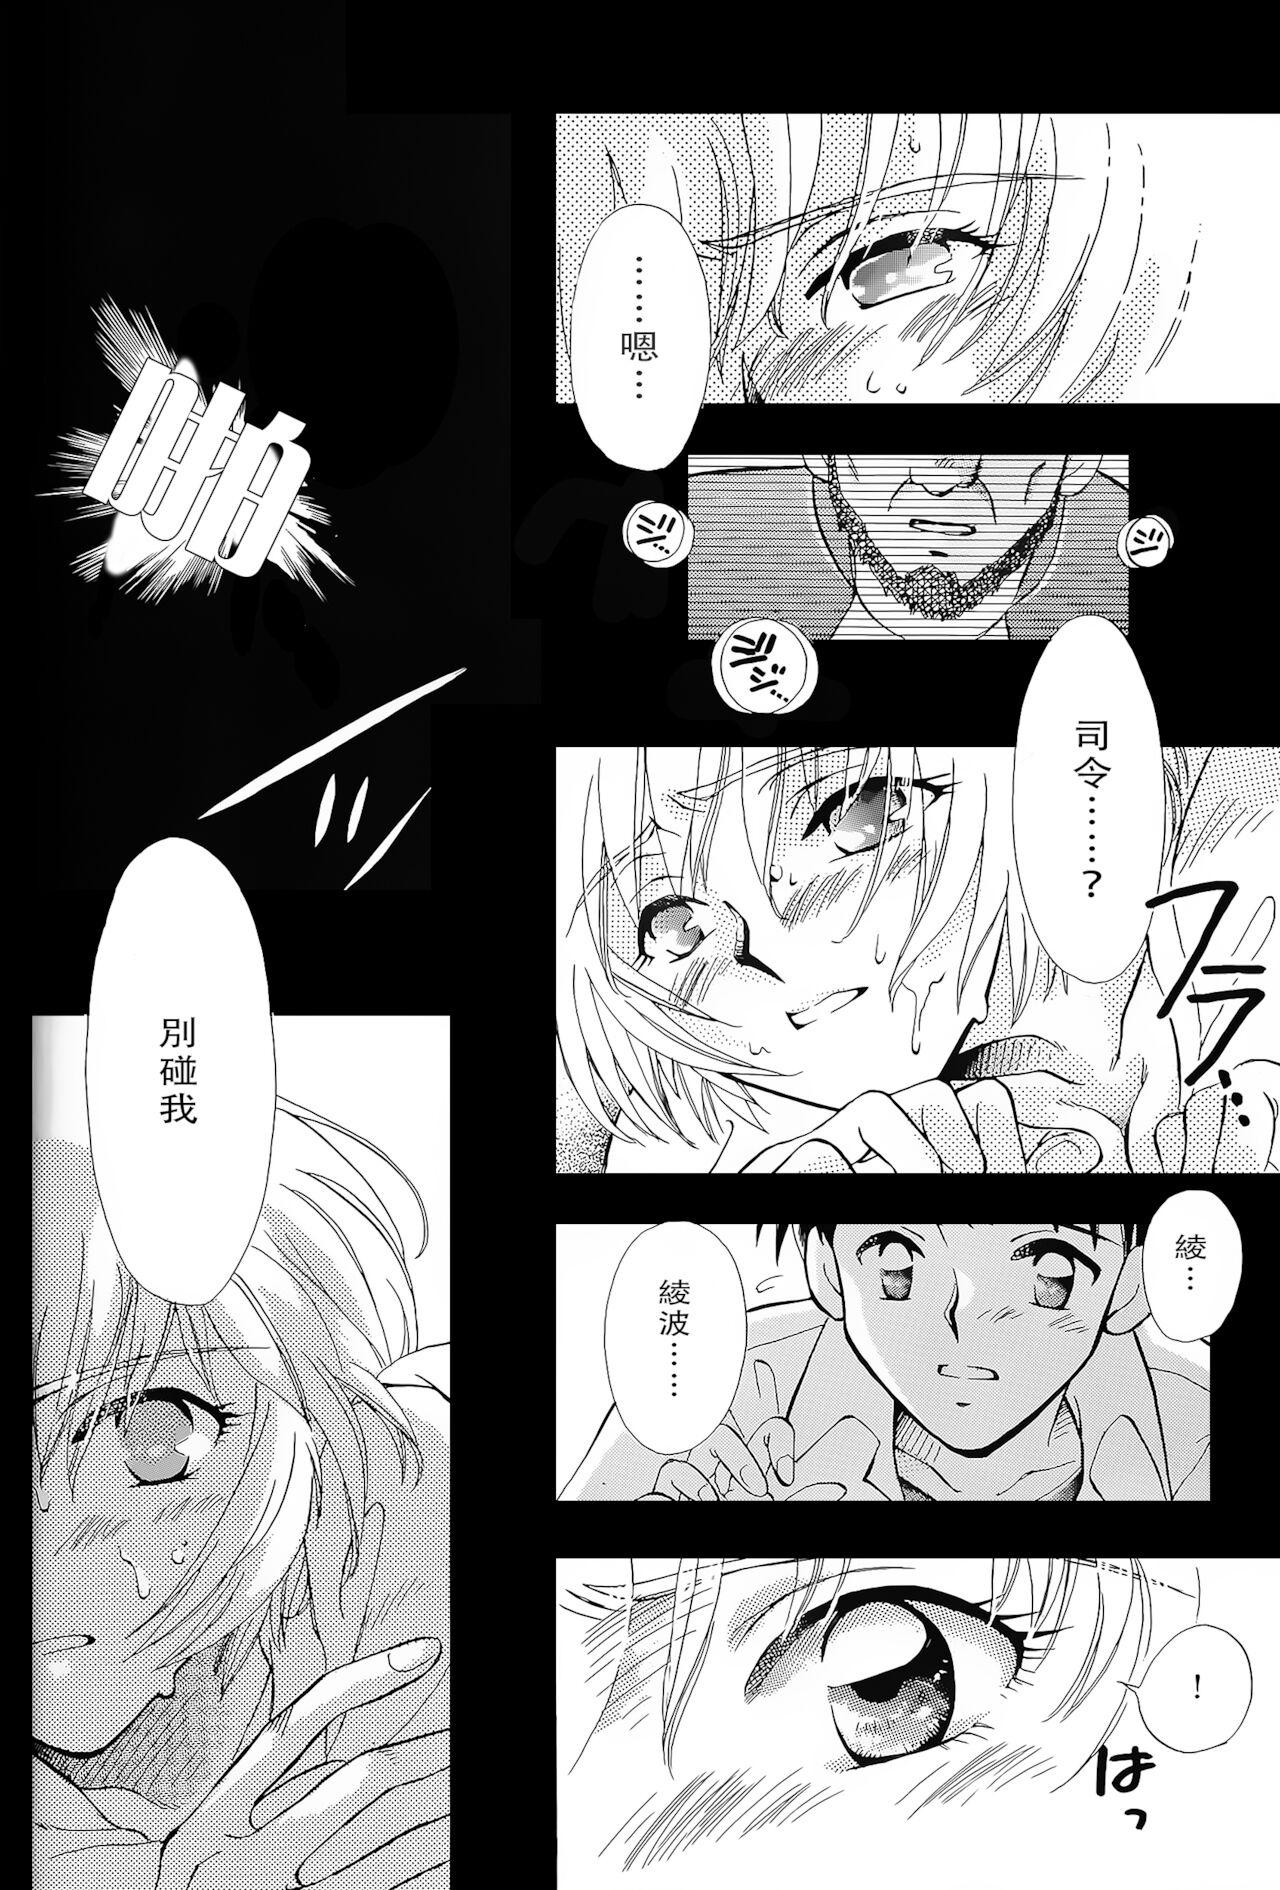 The PEPPY ANGEL episode0.1 - Neon genesis evangelion Pure 18 - Page 6